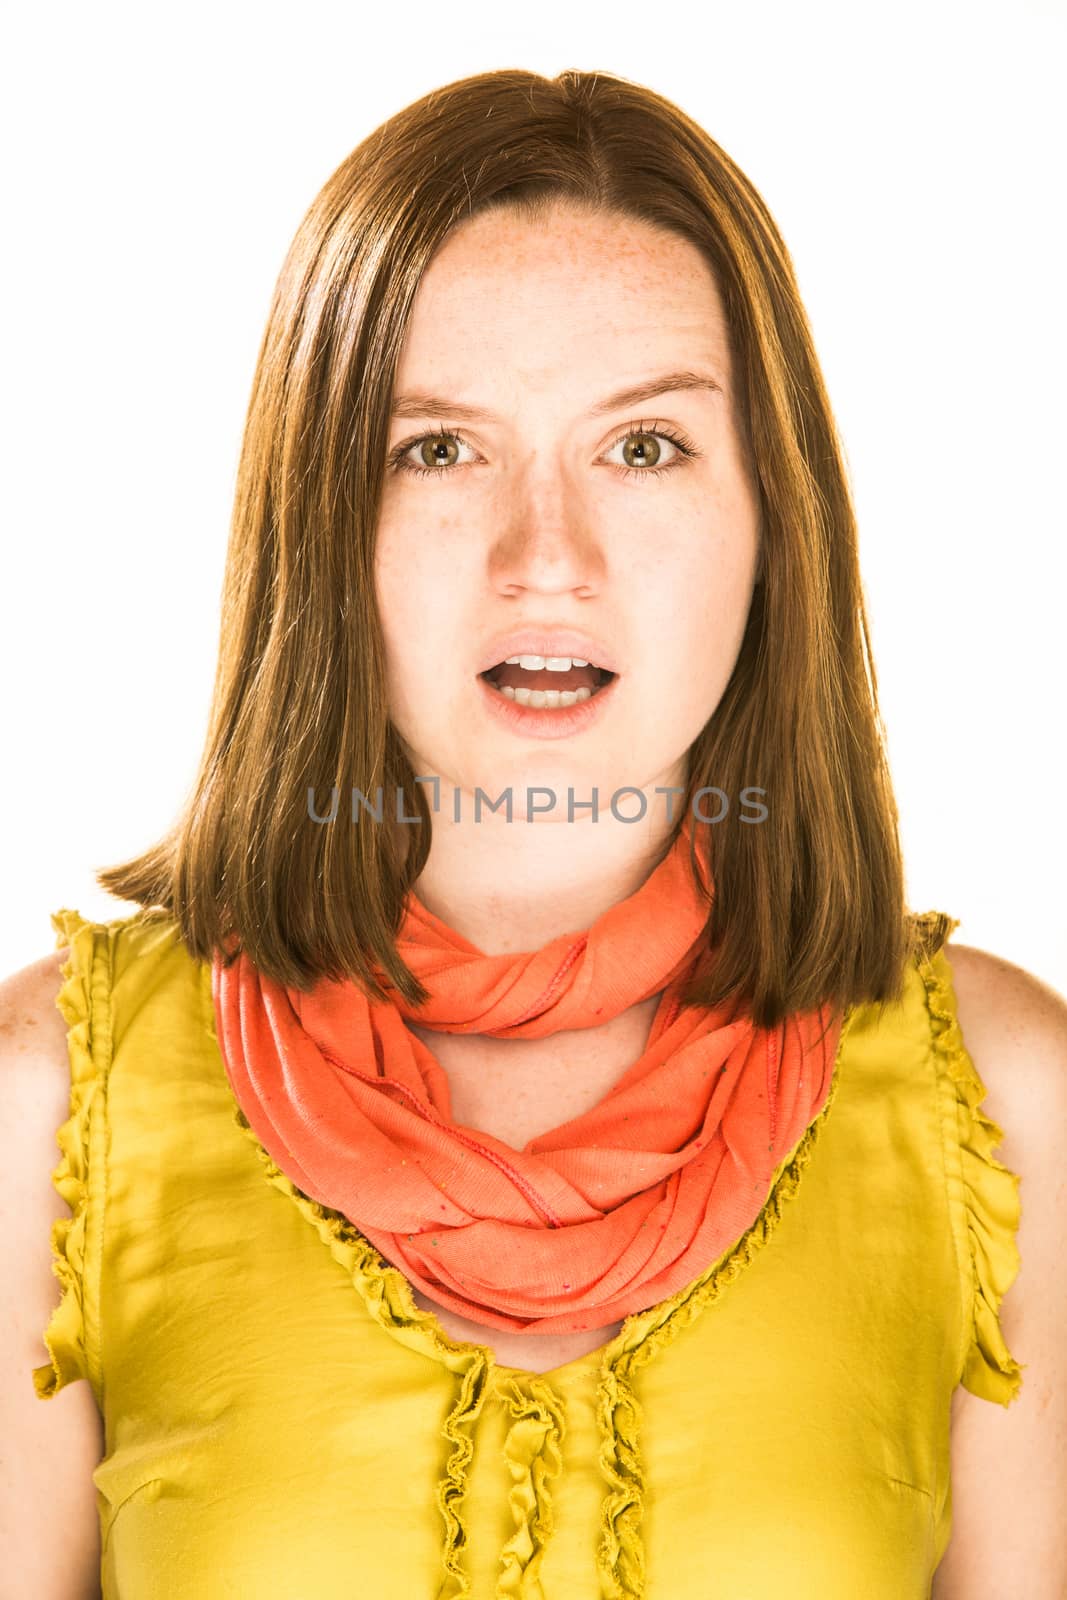 Pretty girl with an unsure expression on white background